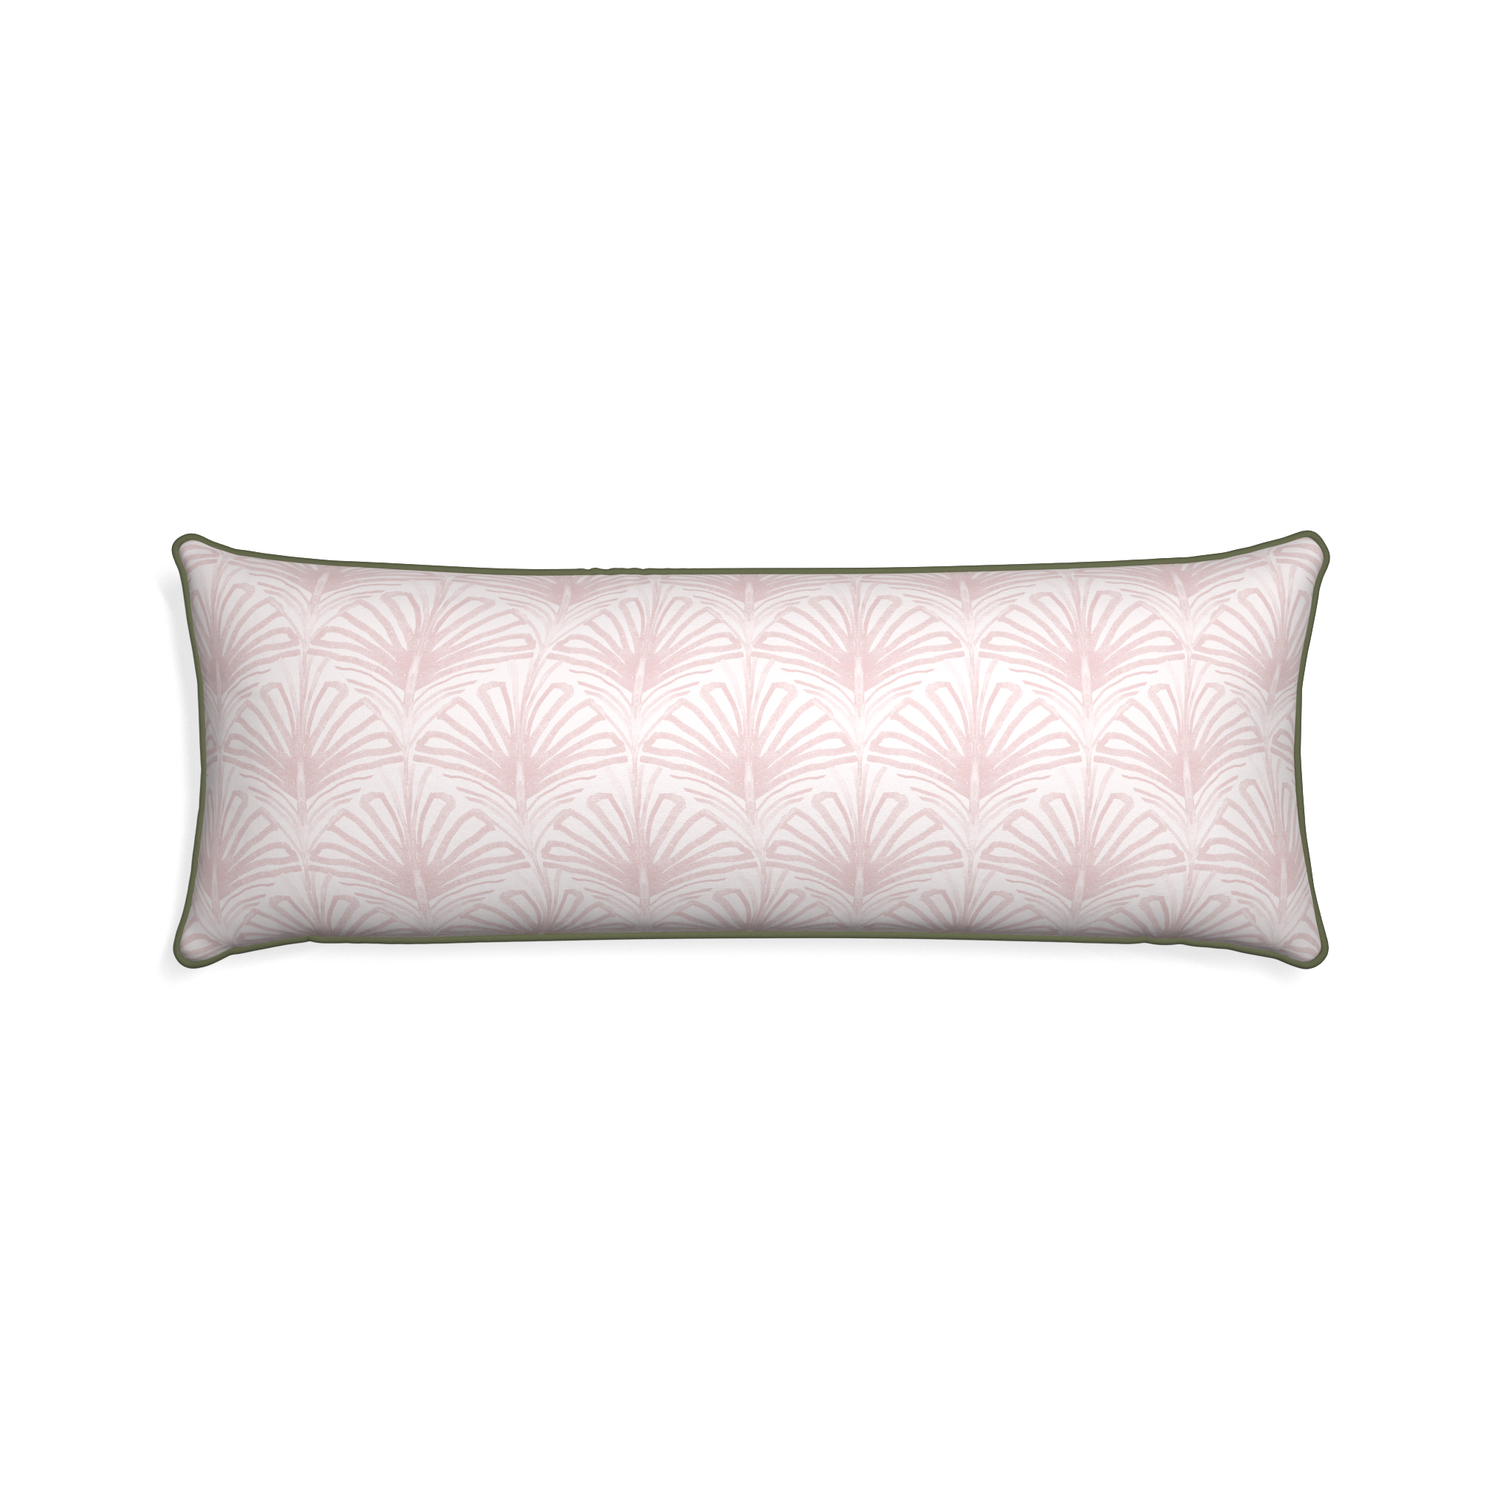 Xl-lumbar suzy rose custom pillow with f piping on white background